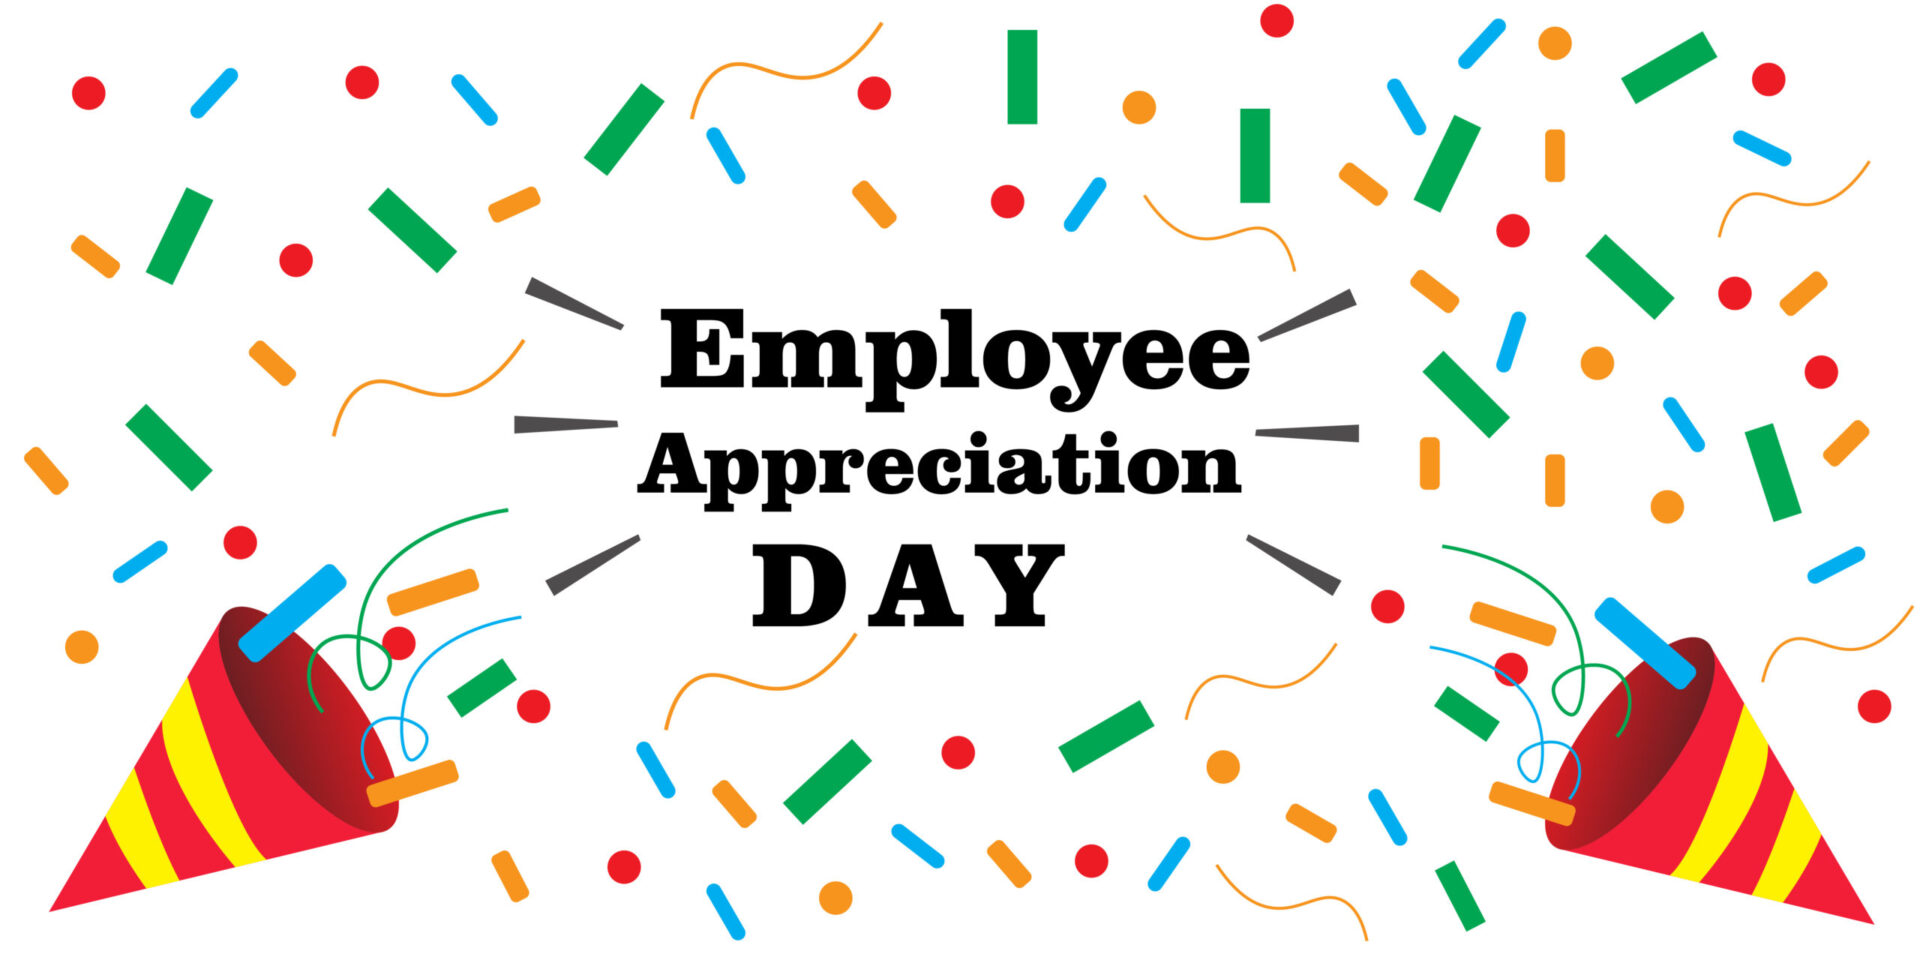 The Gift of Celebrating Employee Appreciation Day